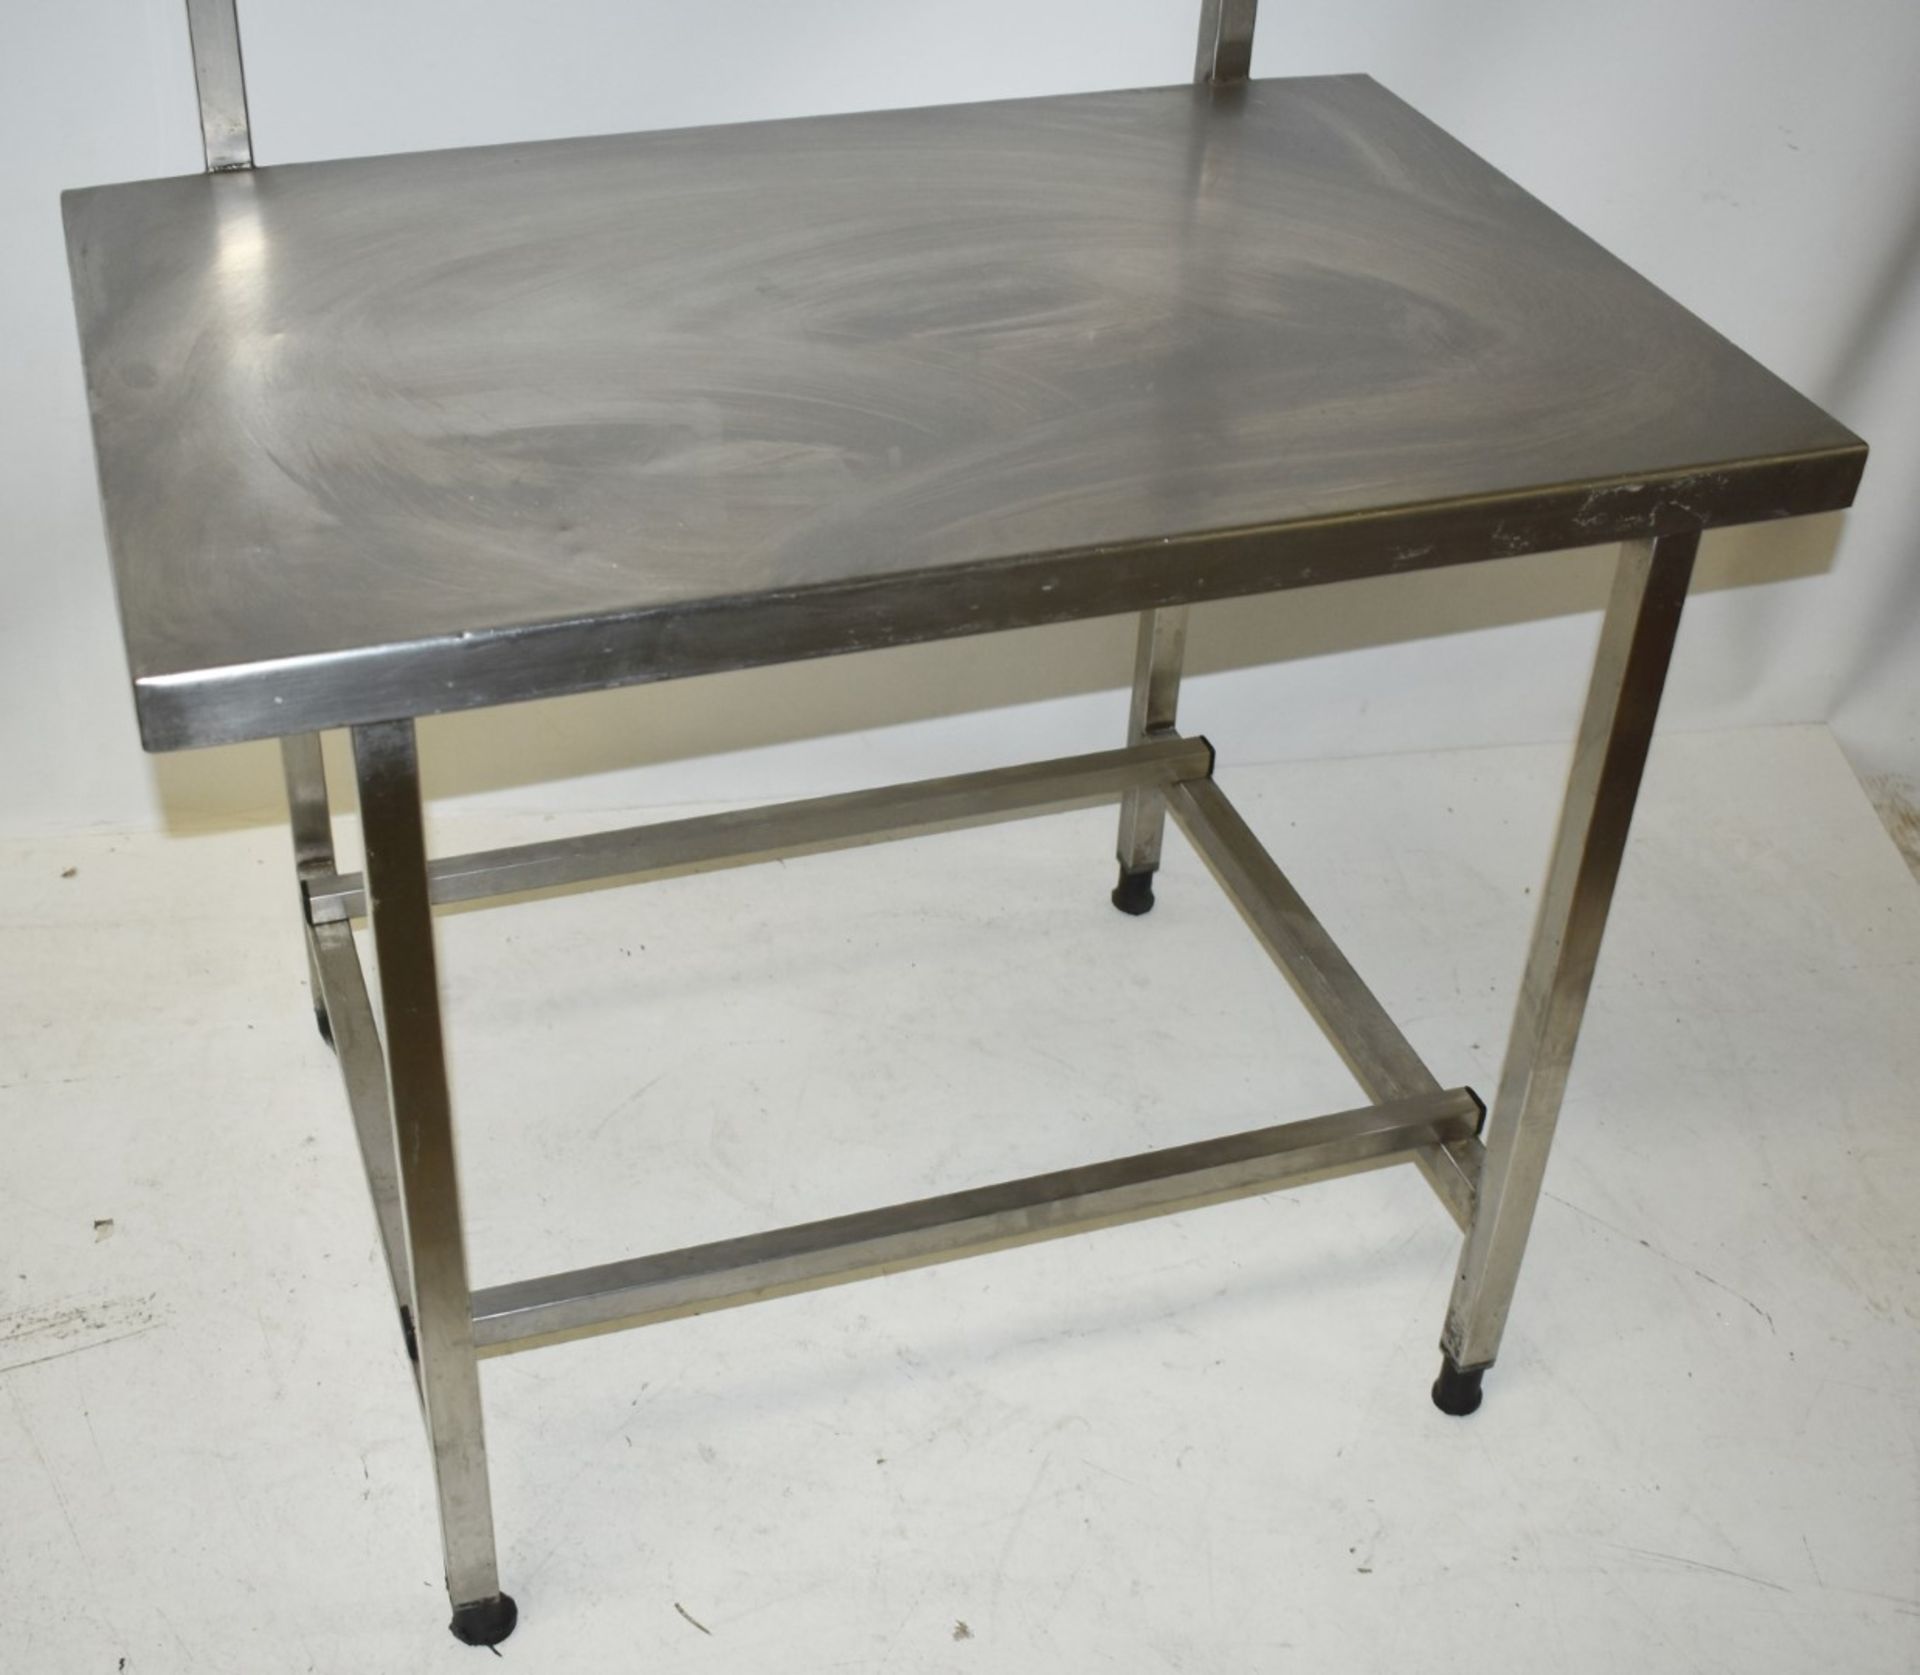 1 x Stainless Steel Prep Bench With Overhead Back Rails - H96/157 x W140 x D65 cms - CL453 - Ref - Image 2 of 5